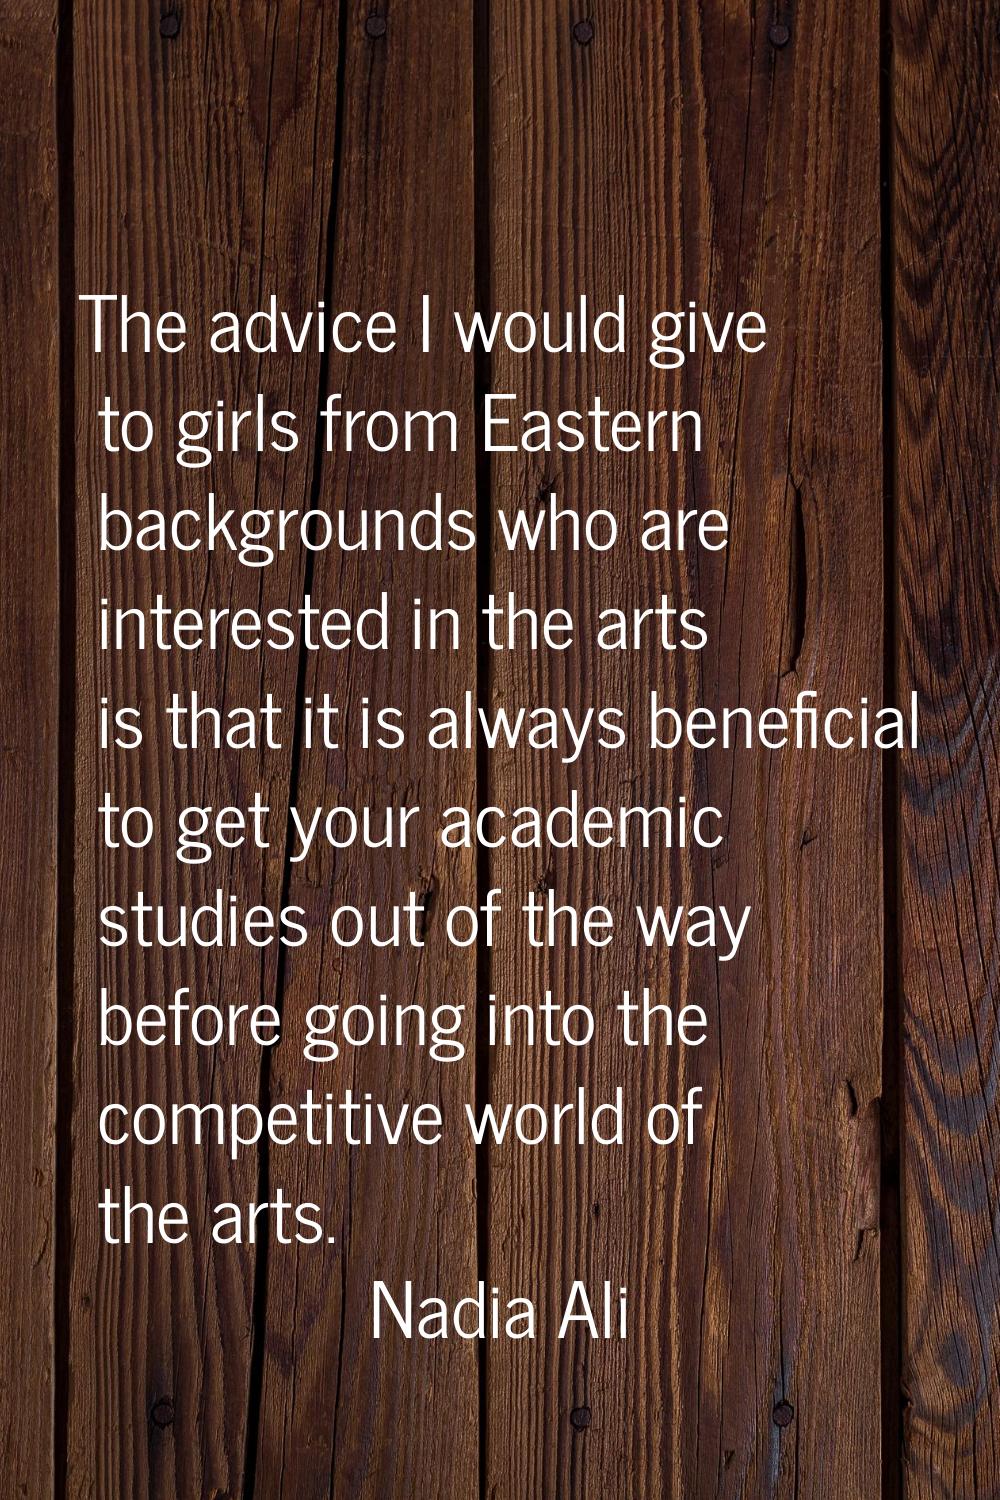 The advice I would give to girls from Eastern backgrounds who are interested in the arts is that it